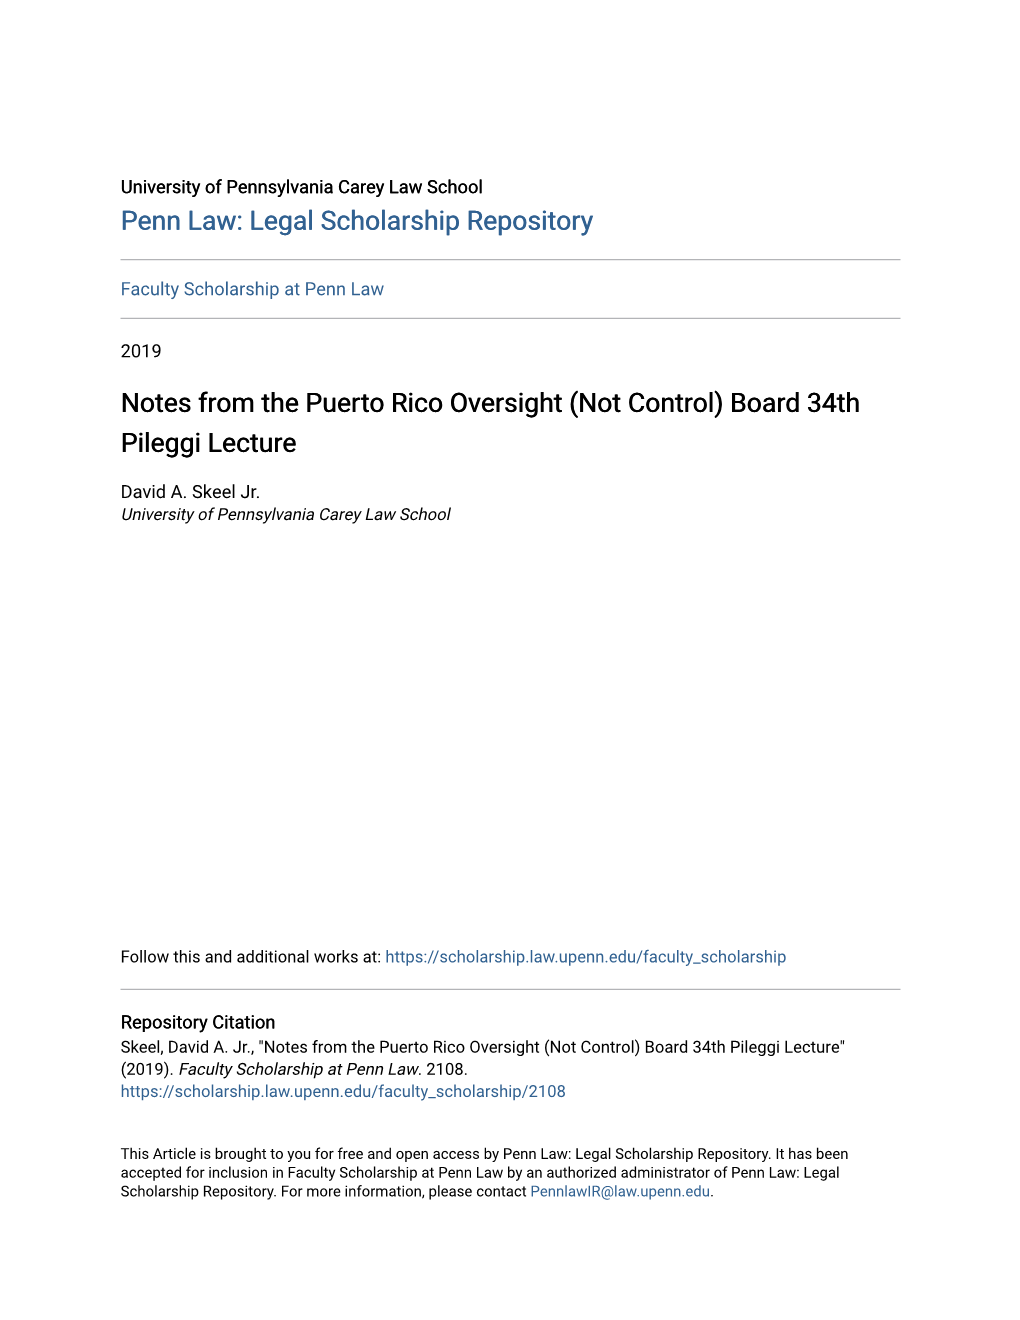 Notes from the Puerto Rico Oversight (Not Control) Board 34Th Pileggi Lecture